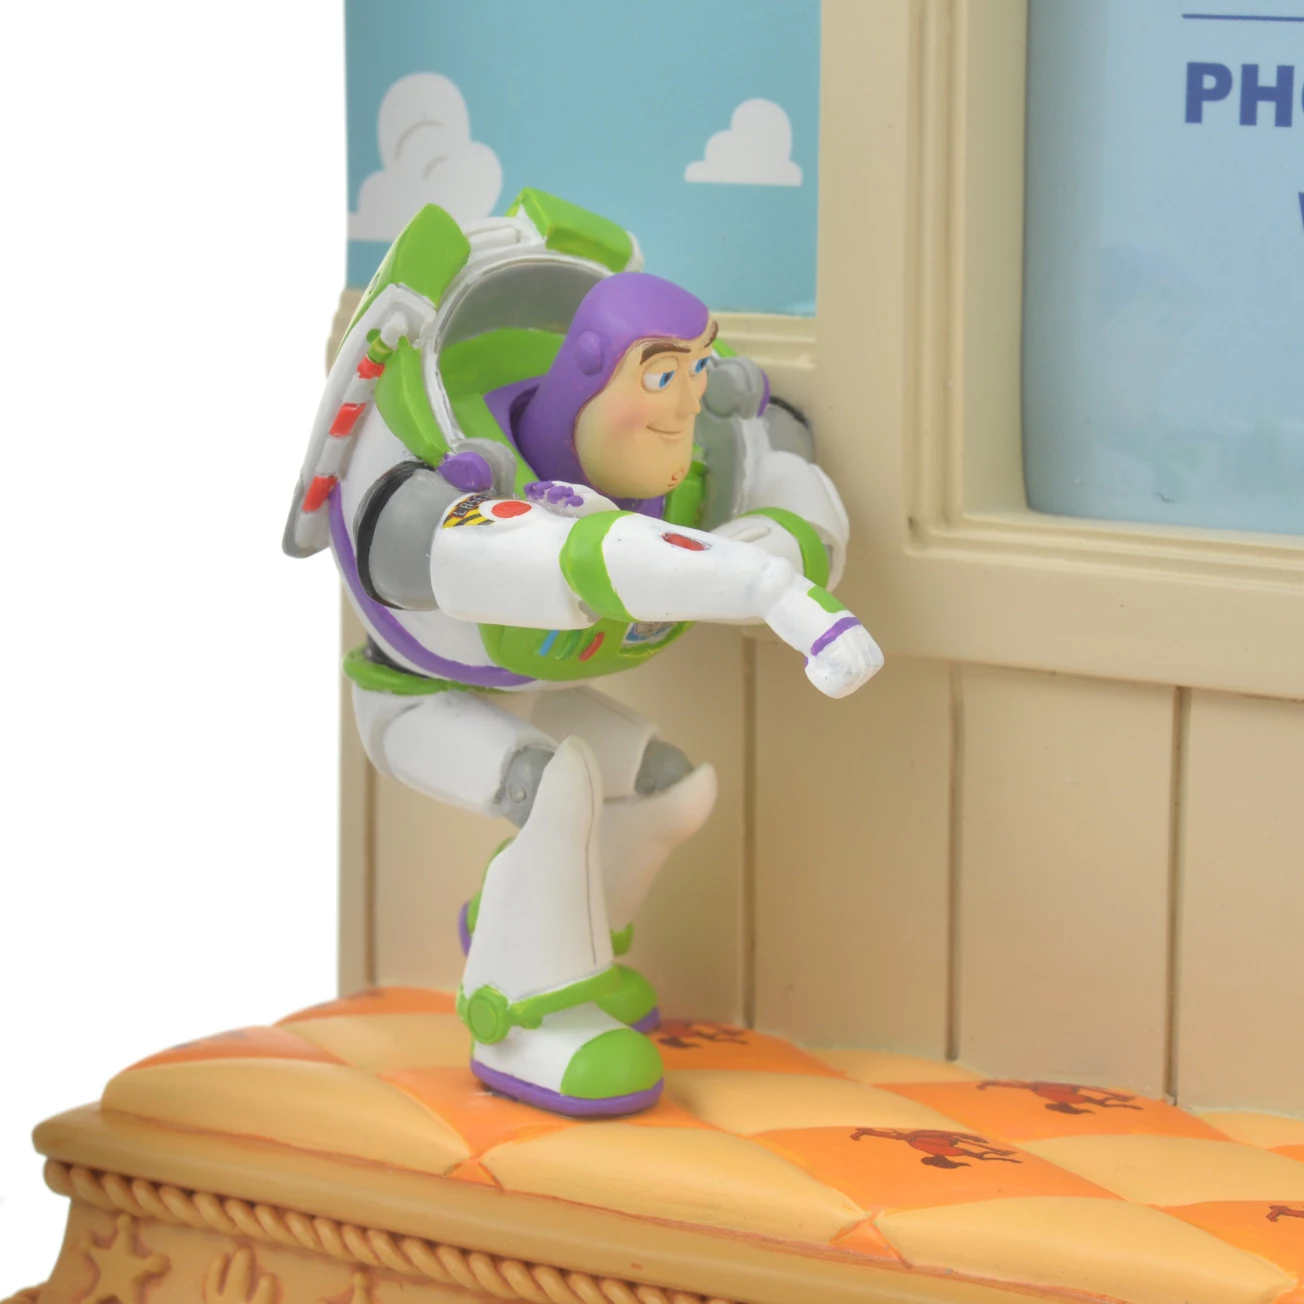 SDJ - Story Collection - Toy Story Figure